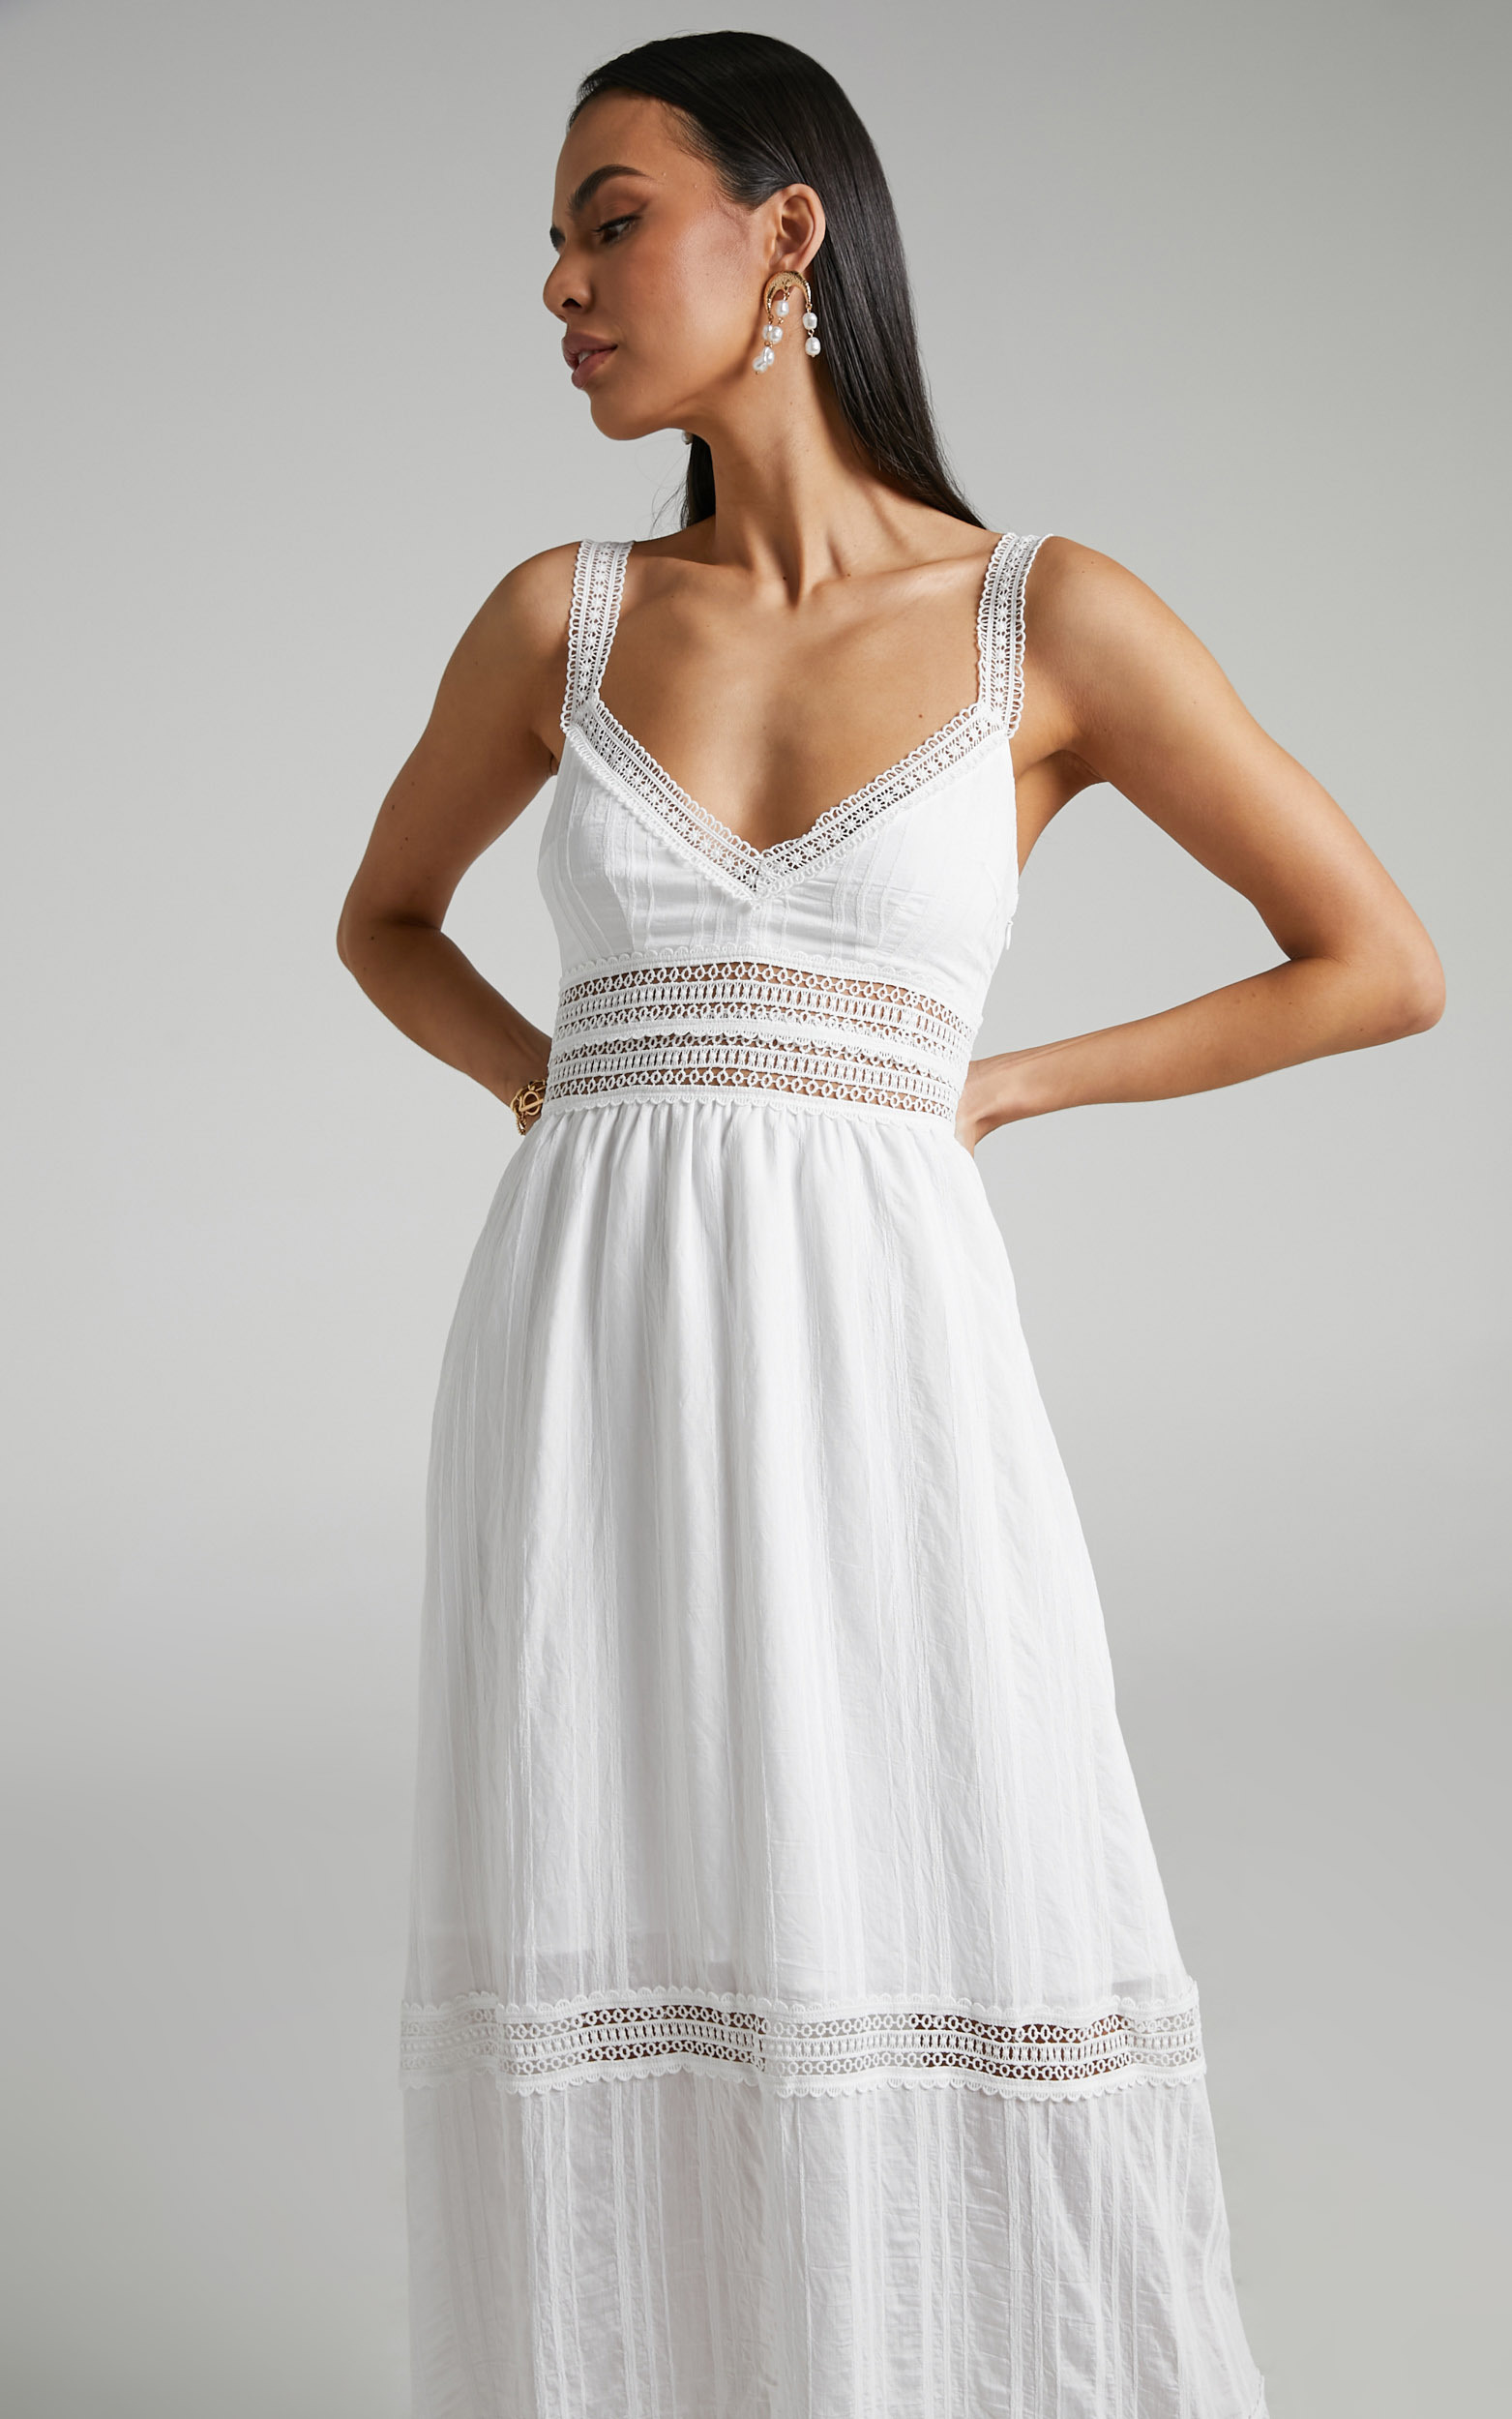 Angelique Lace trim Maxi Dress in White - 04, WHT2, hi-res image number null